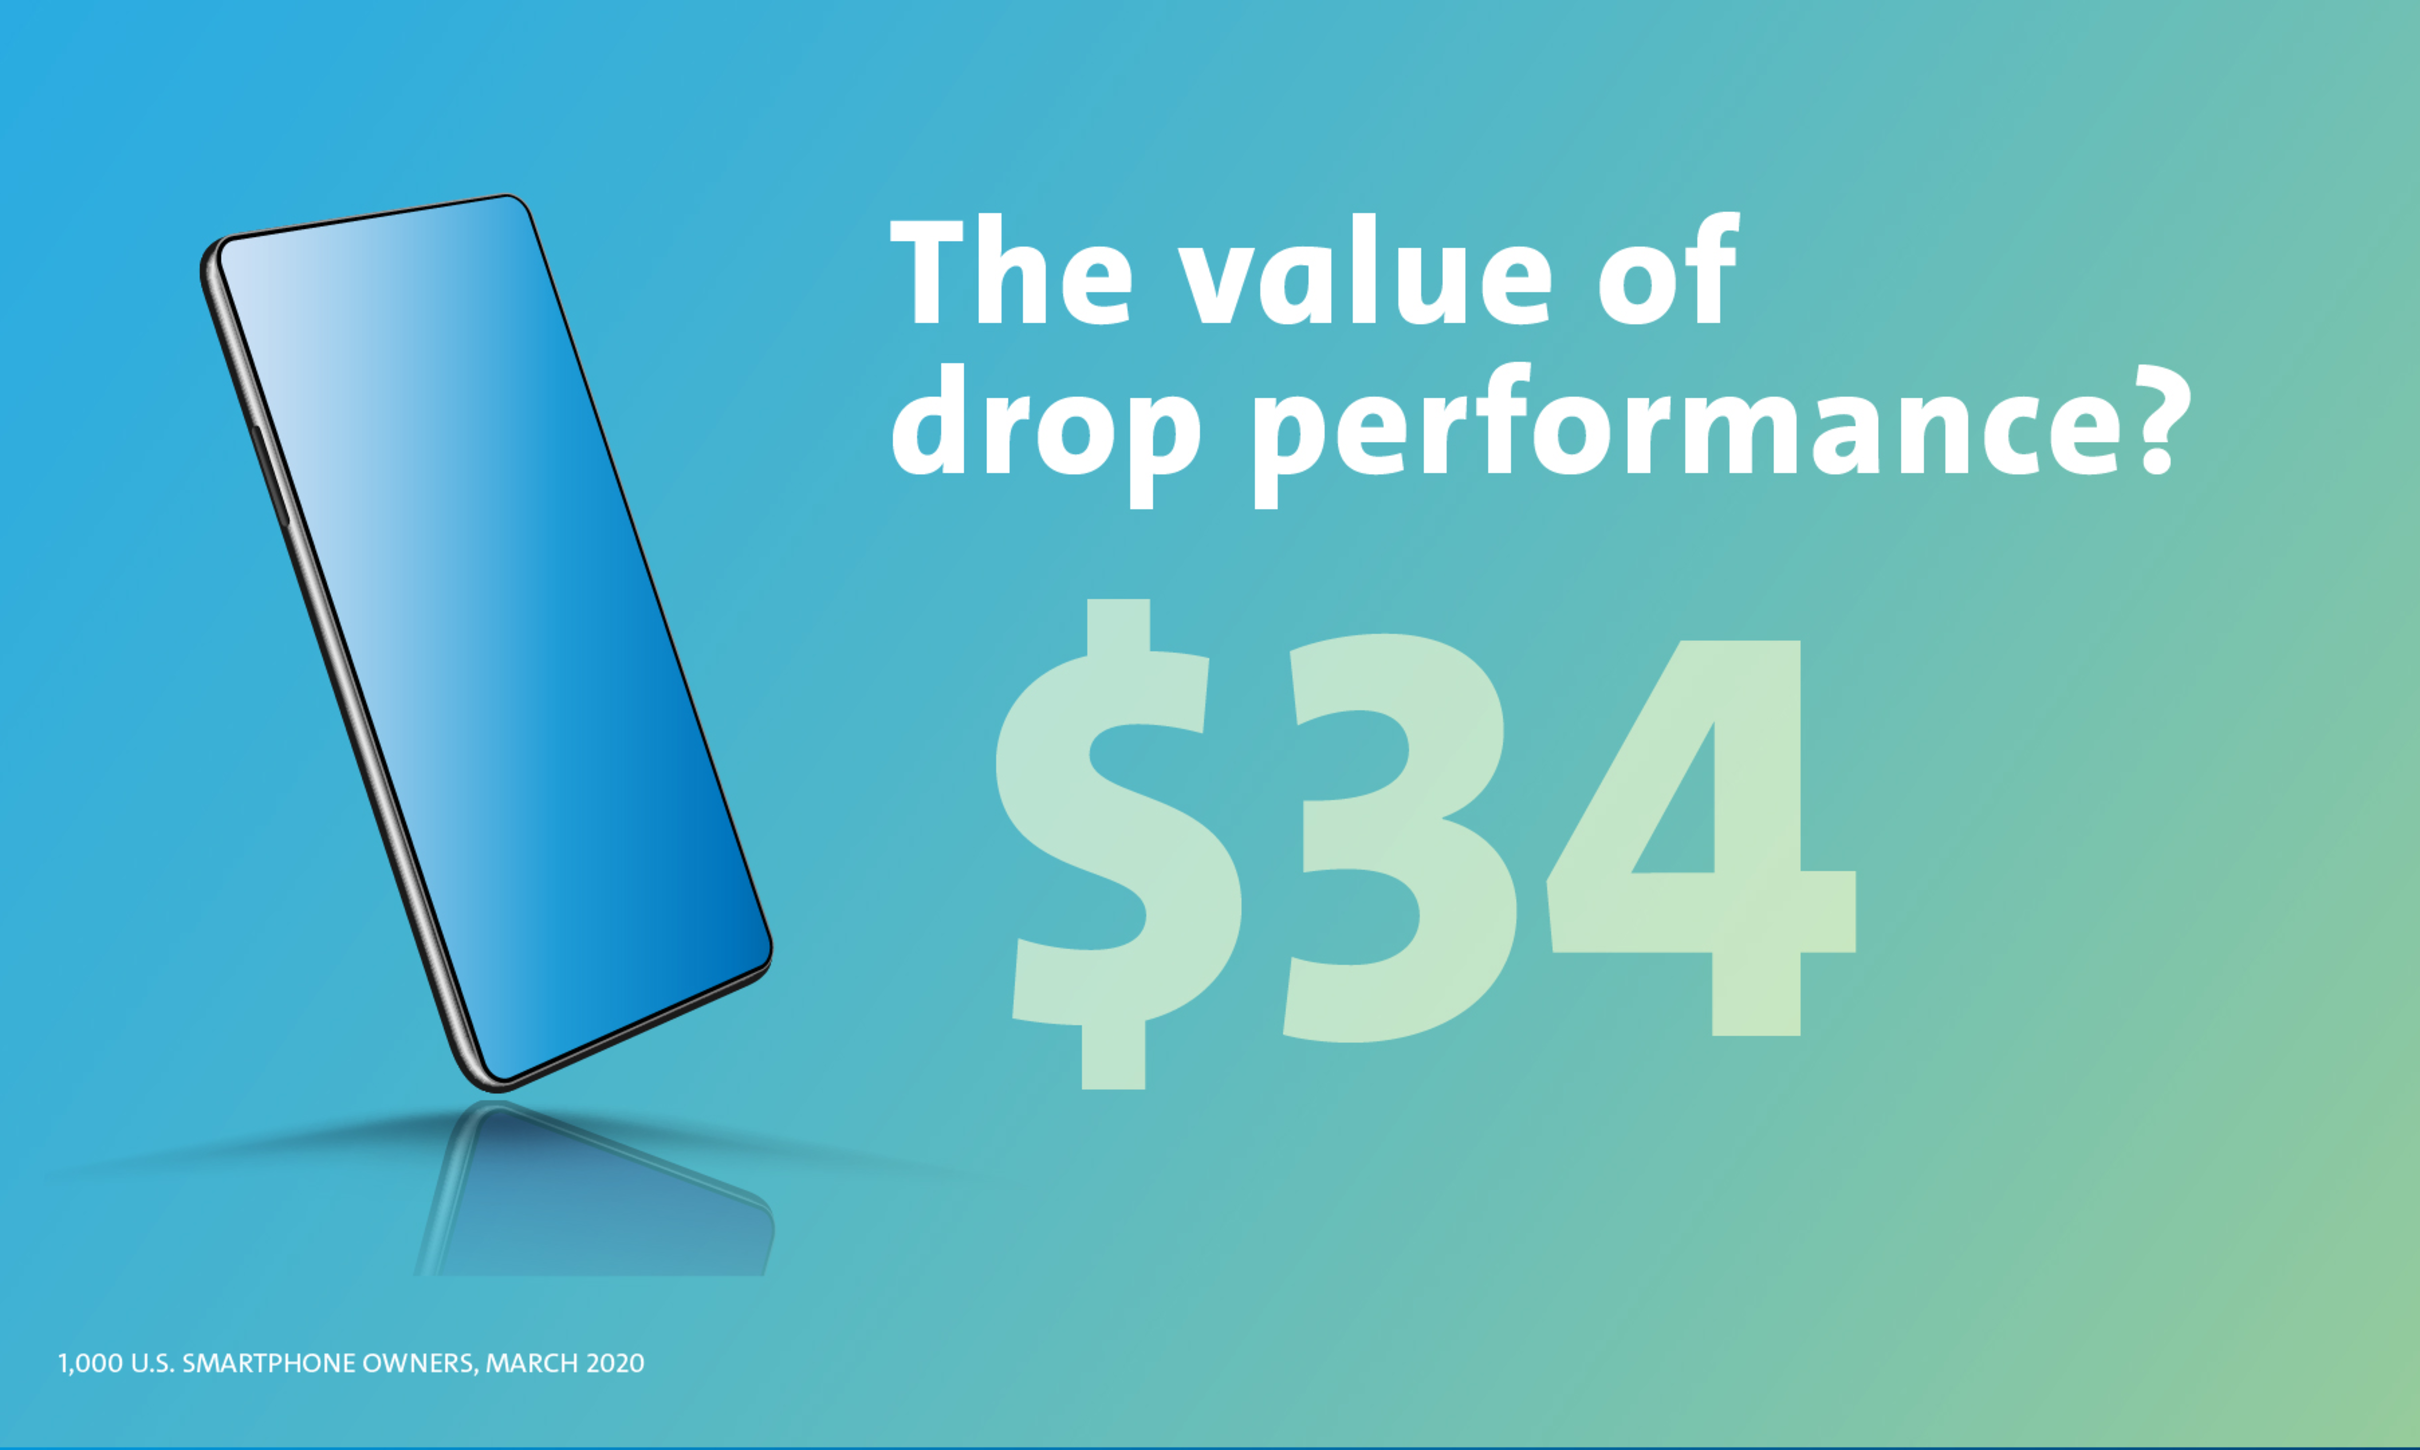 The value of drop performance?